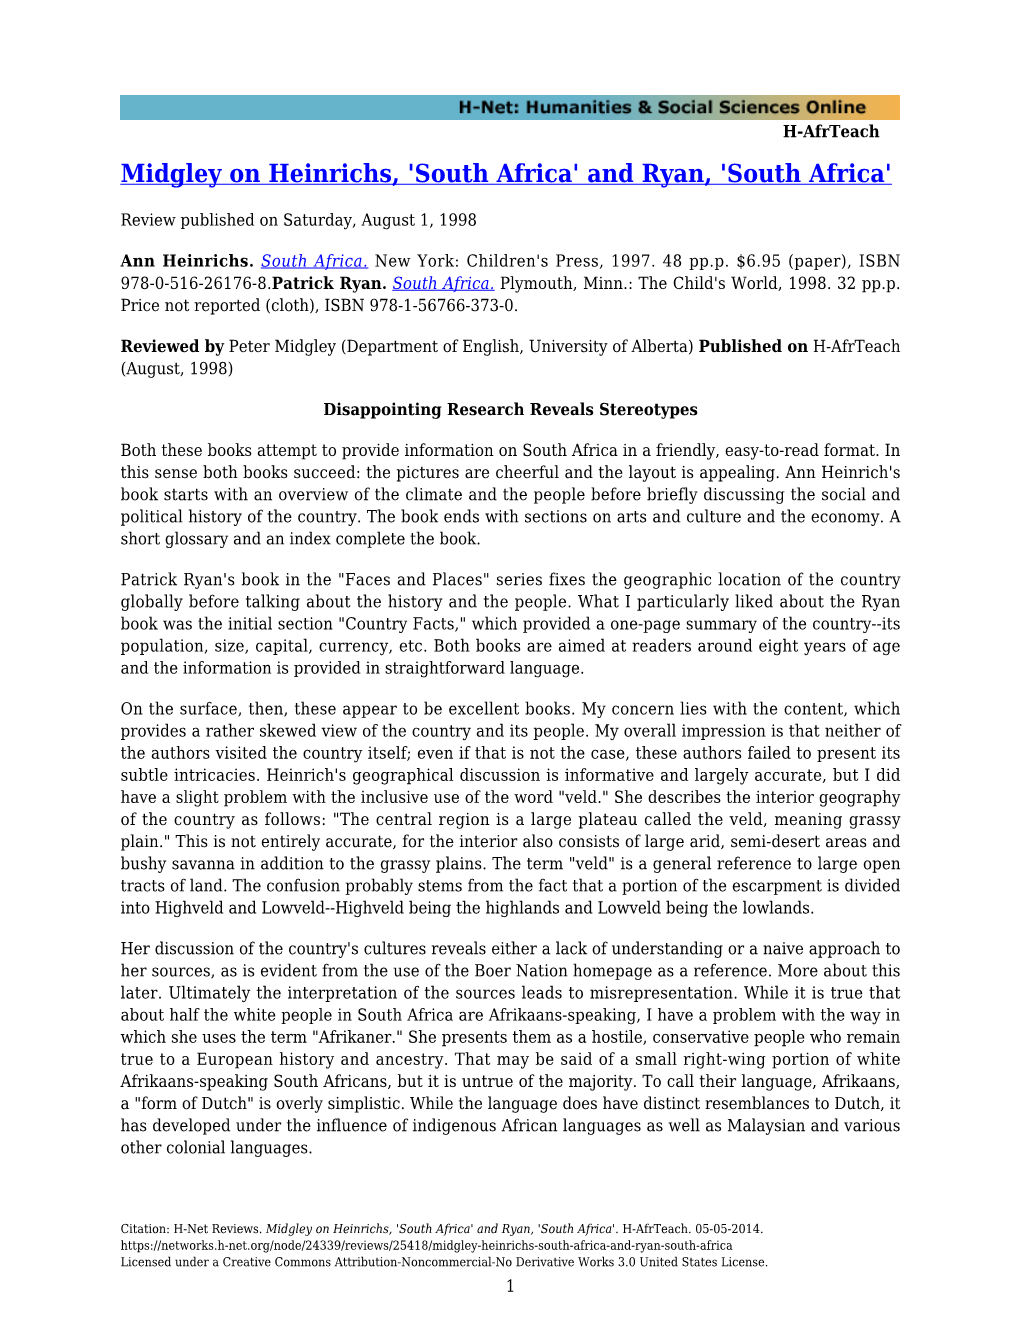 Midgley on Heinrichs, 'South Africa' and Ryan, 'South Africa'